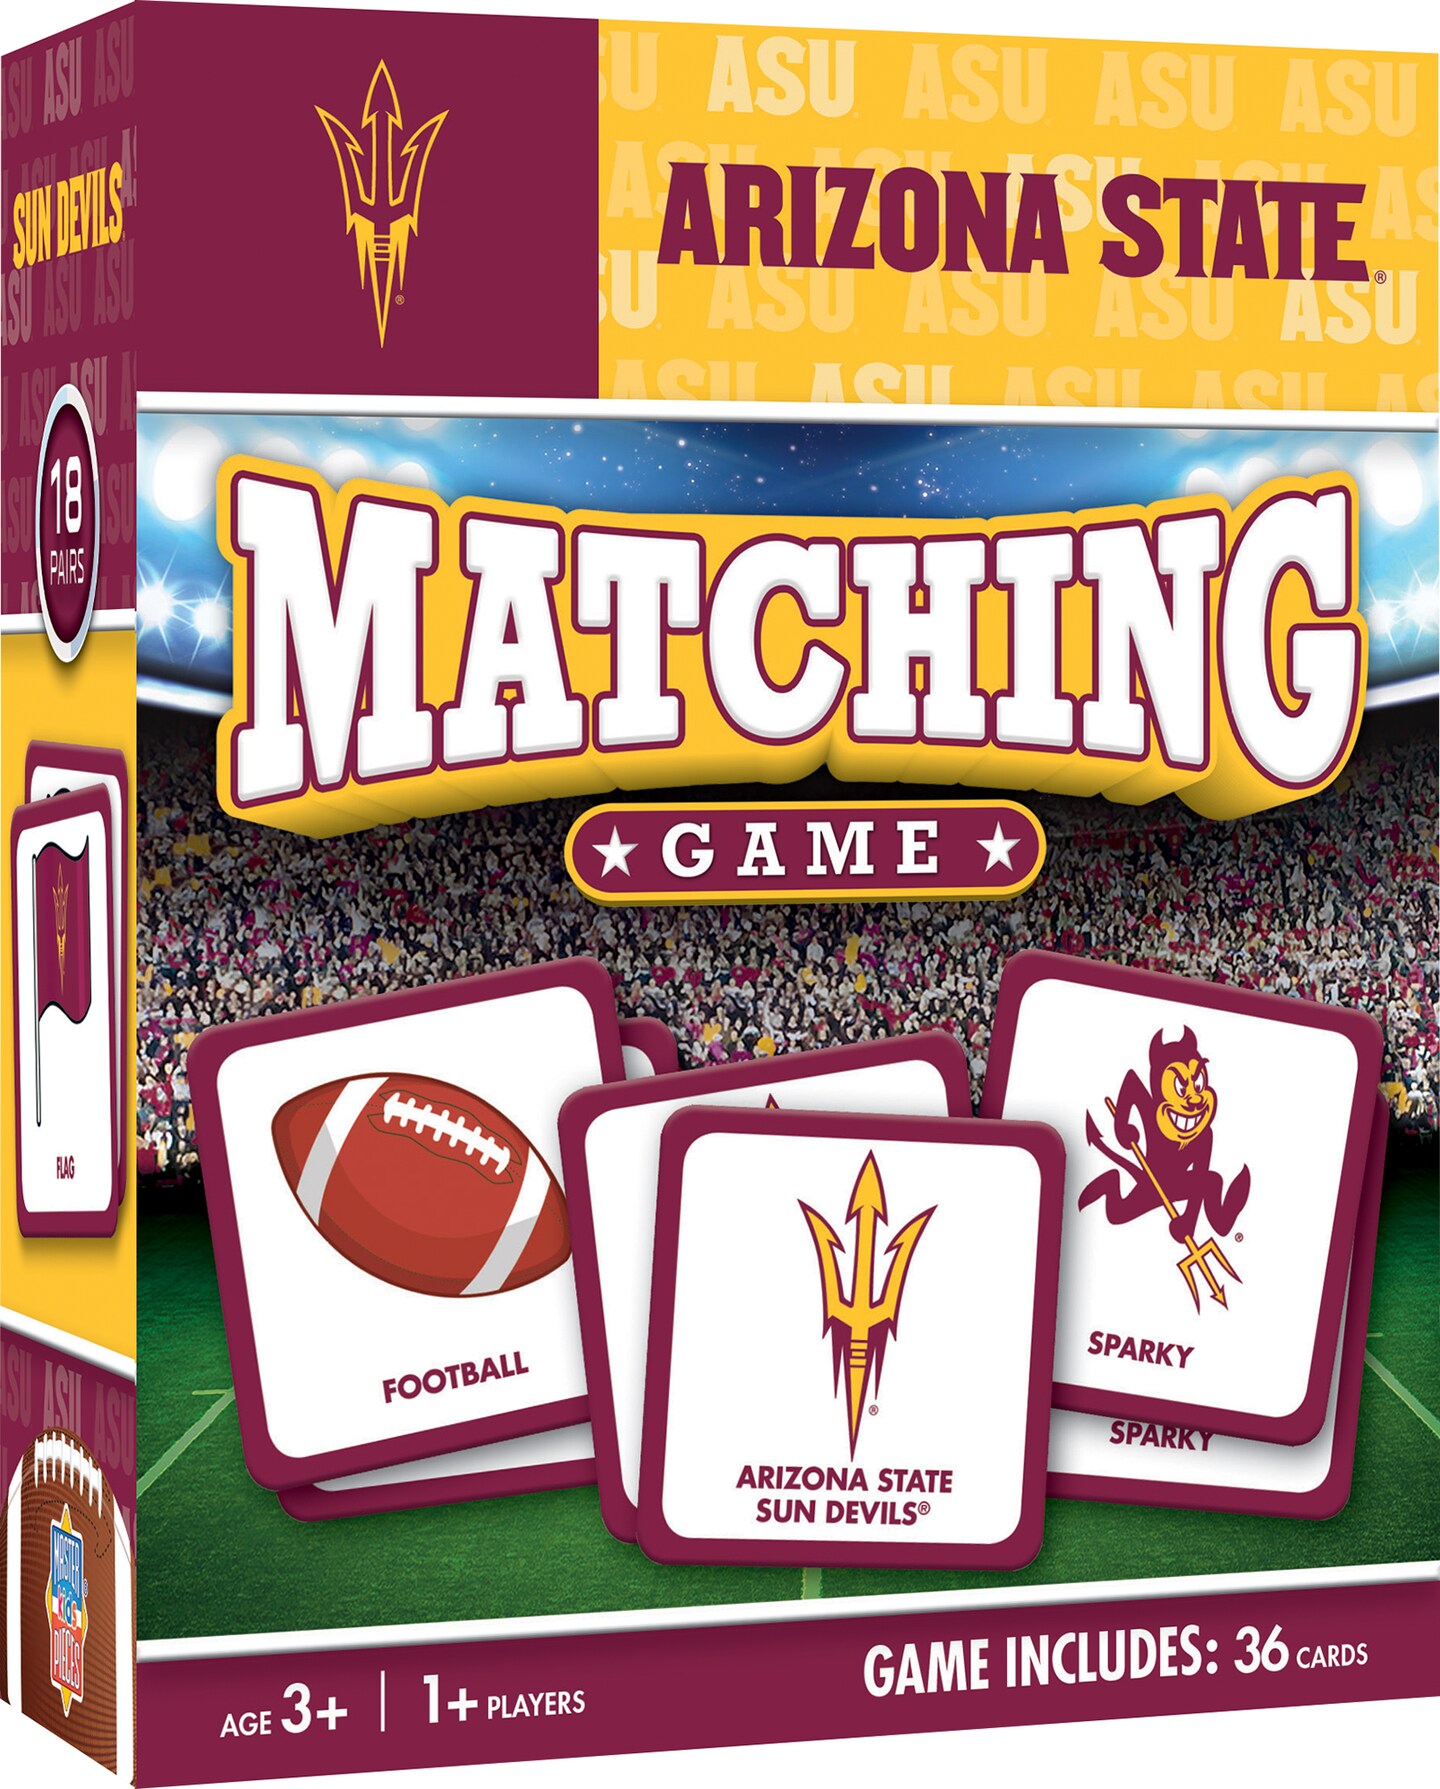 Masterpieces Officially Licensed NCAA Arizona State Sun Devils